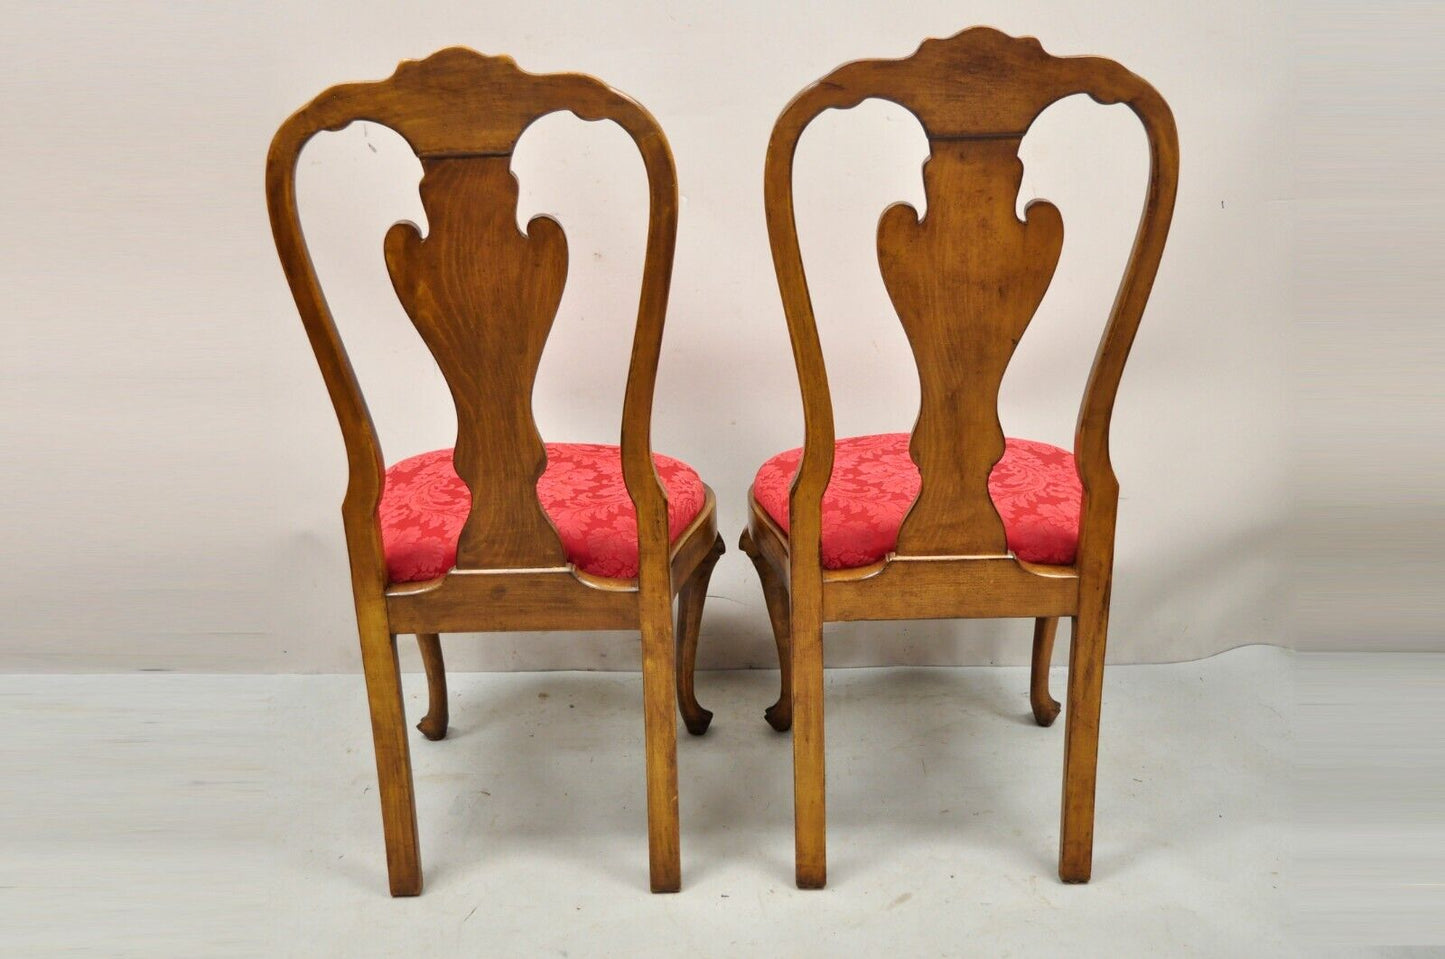 Vintage Queen Anne Style Shell Carved Solid Wood Dining Chairs - Set of 8